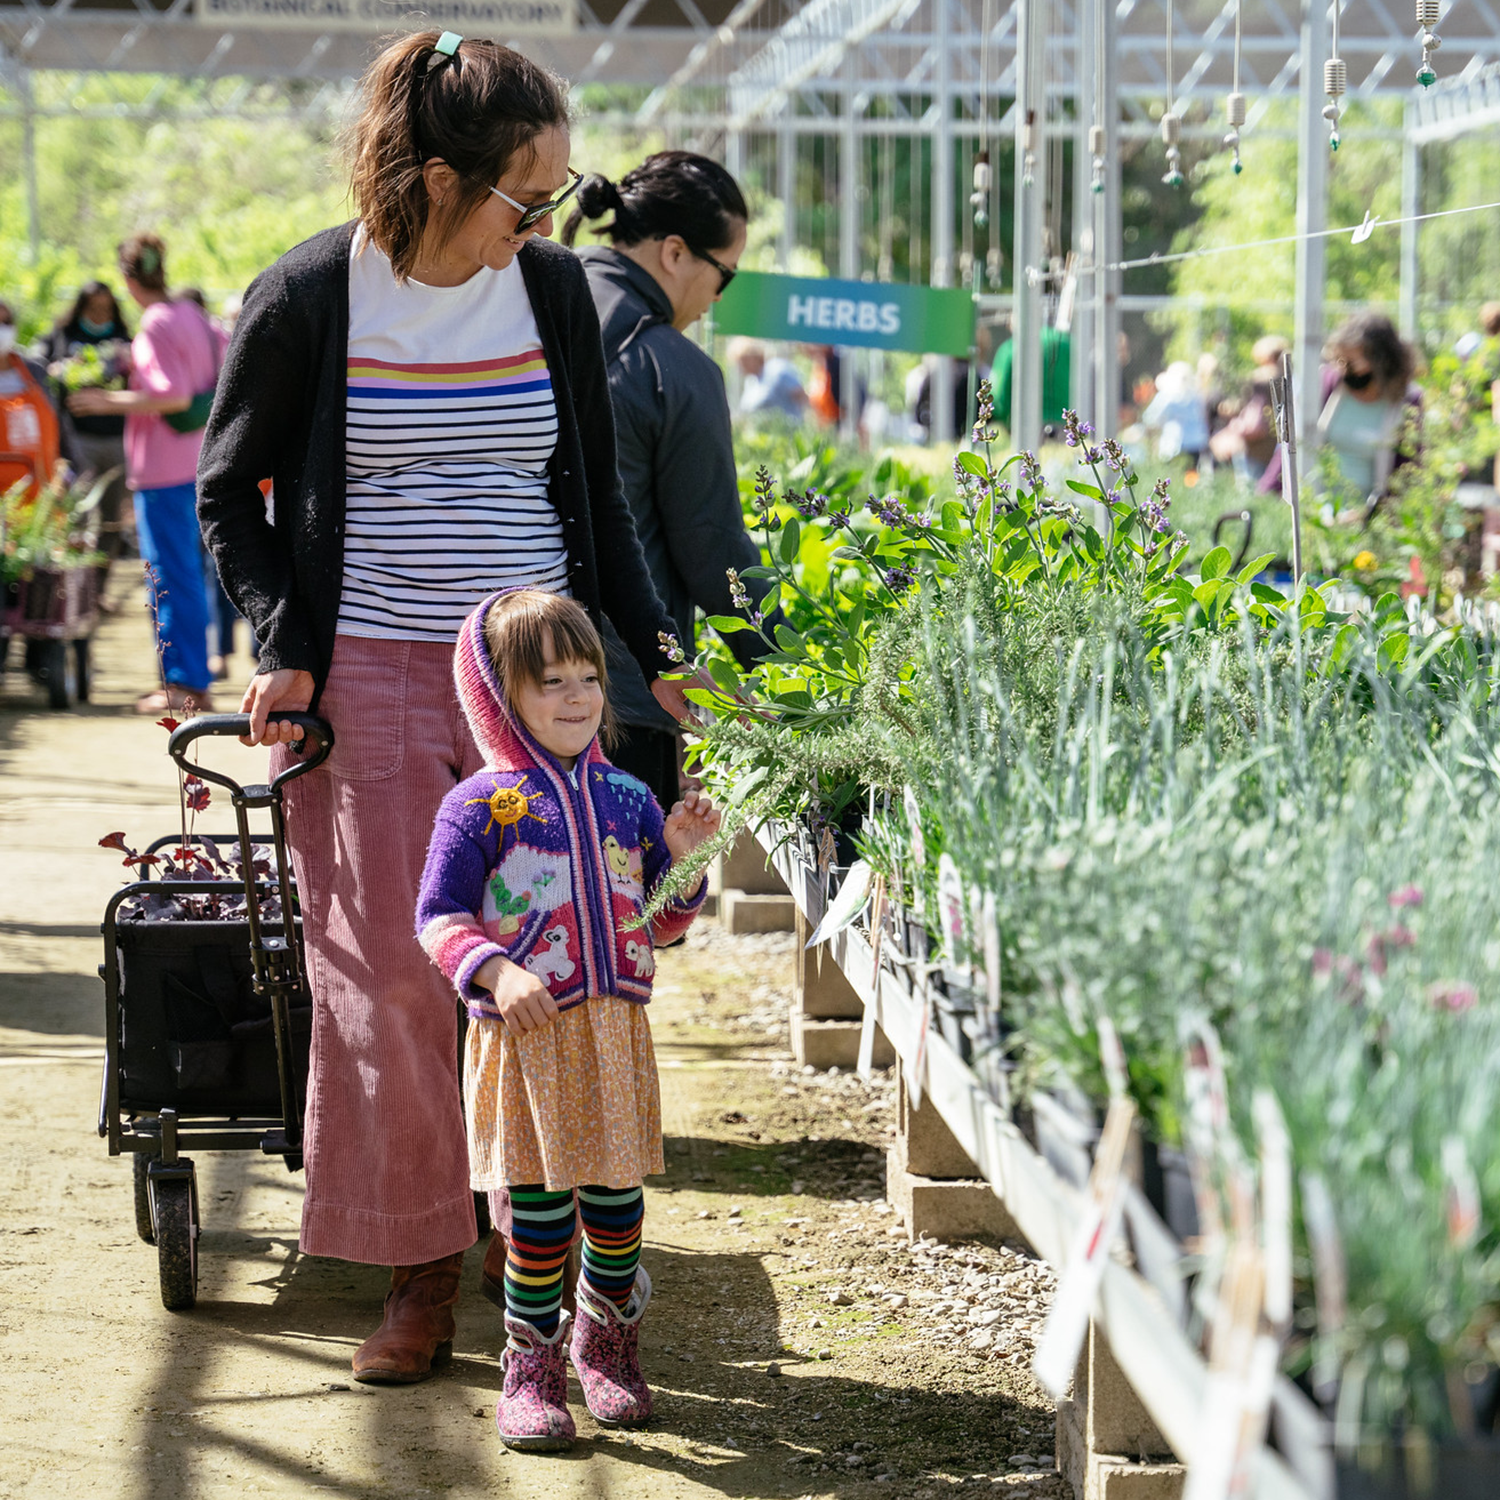 Image of a young girl and her mother shopping at the Arboretum Teaching Nursery during a public Plant sale.